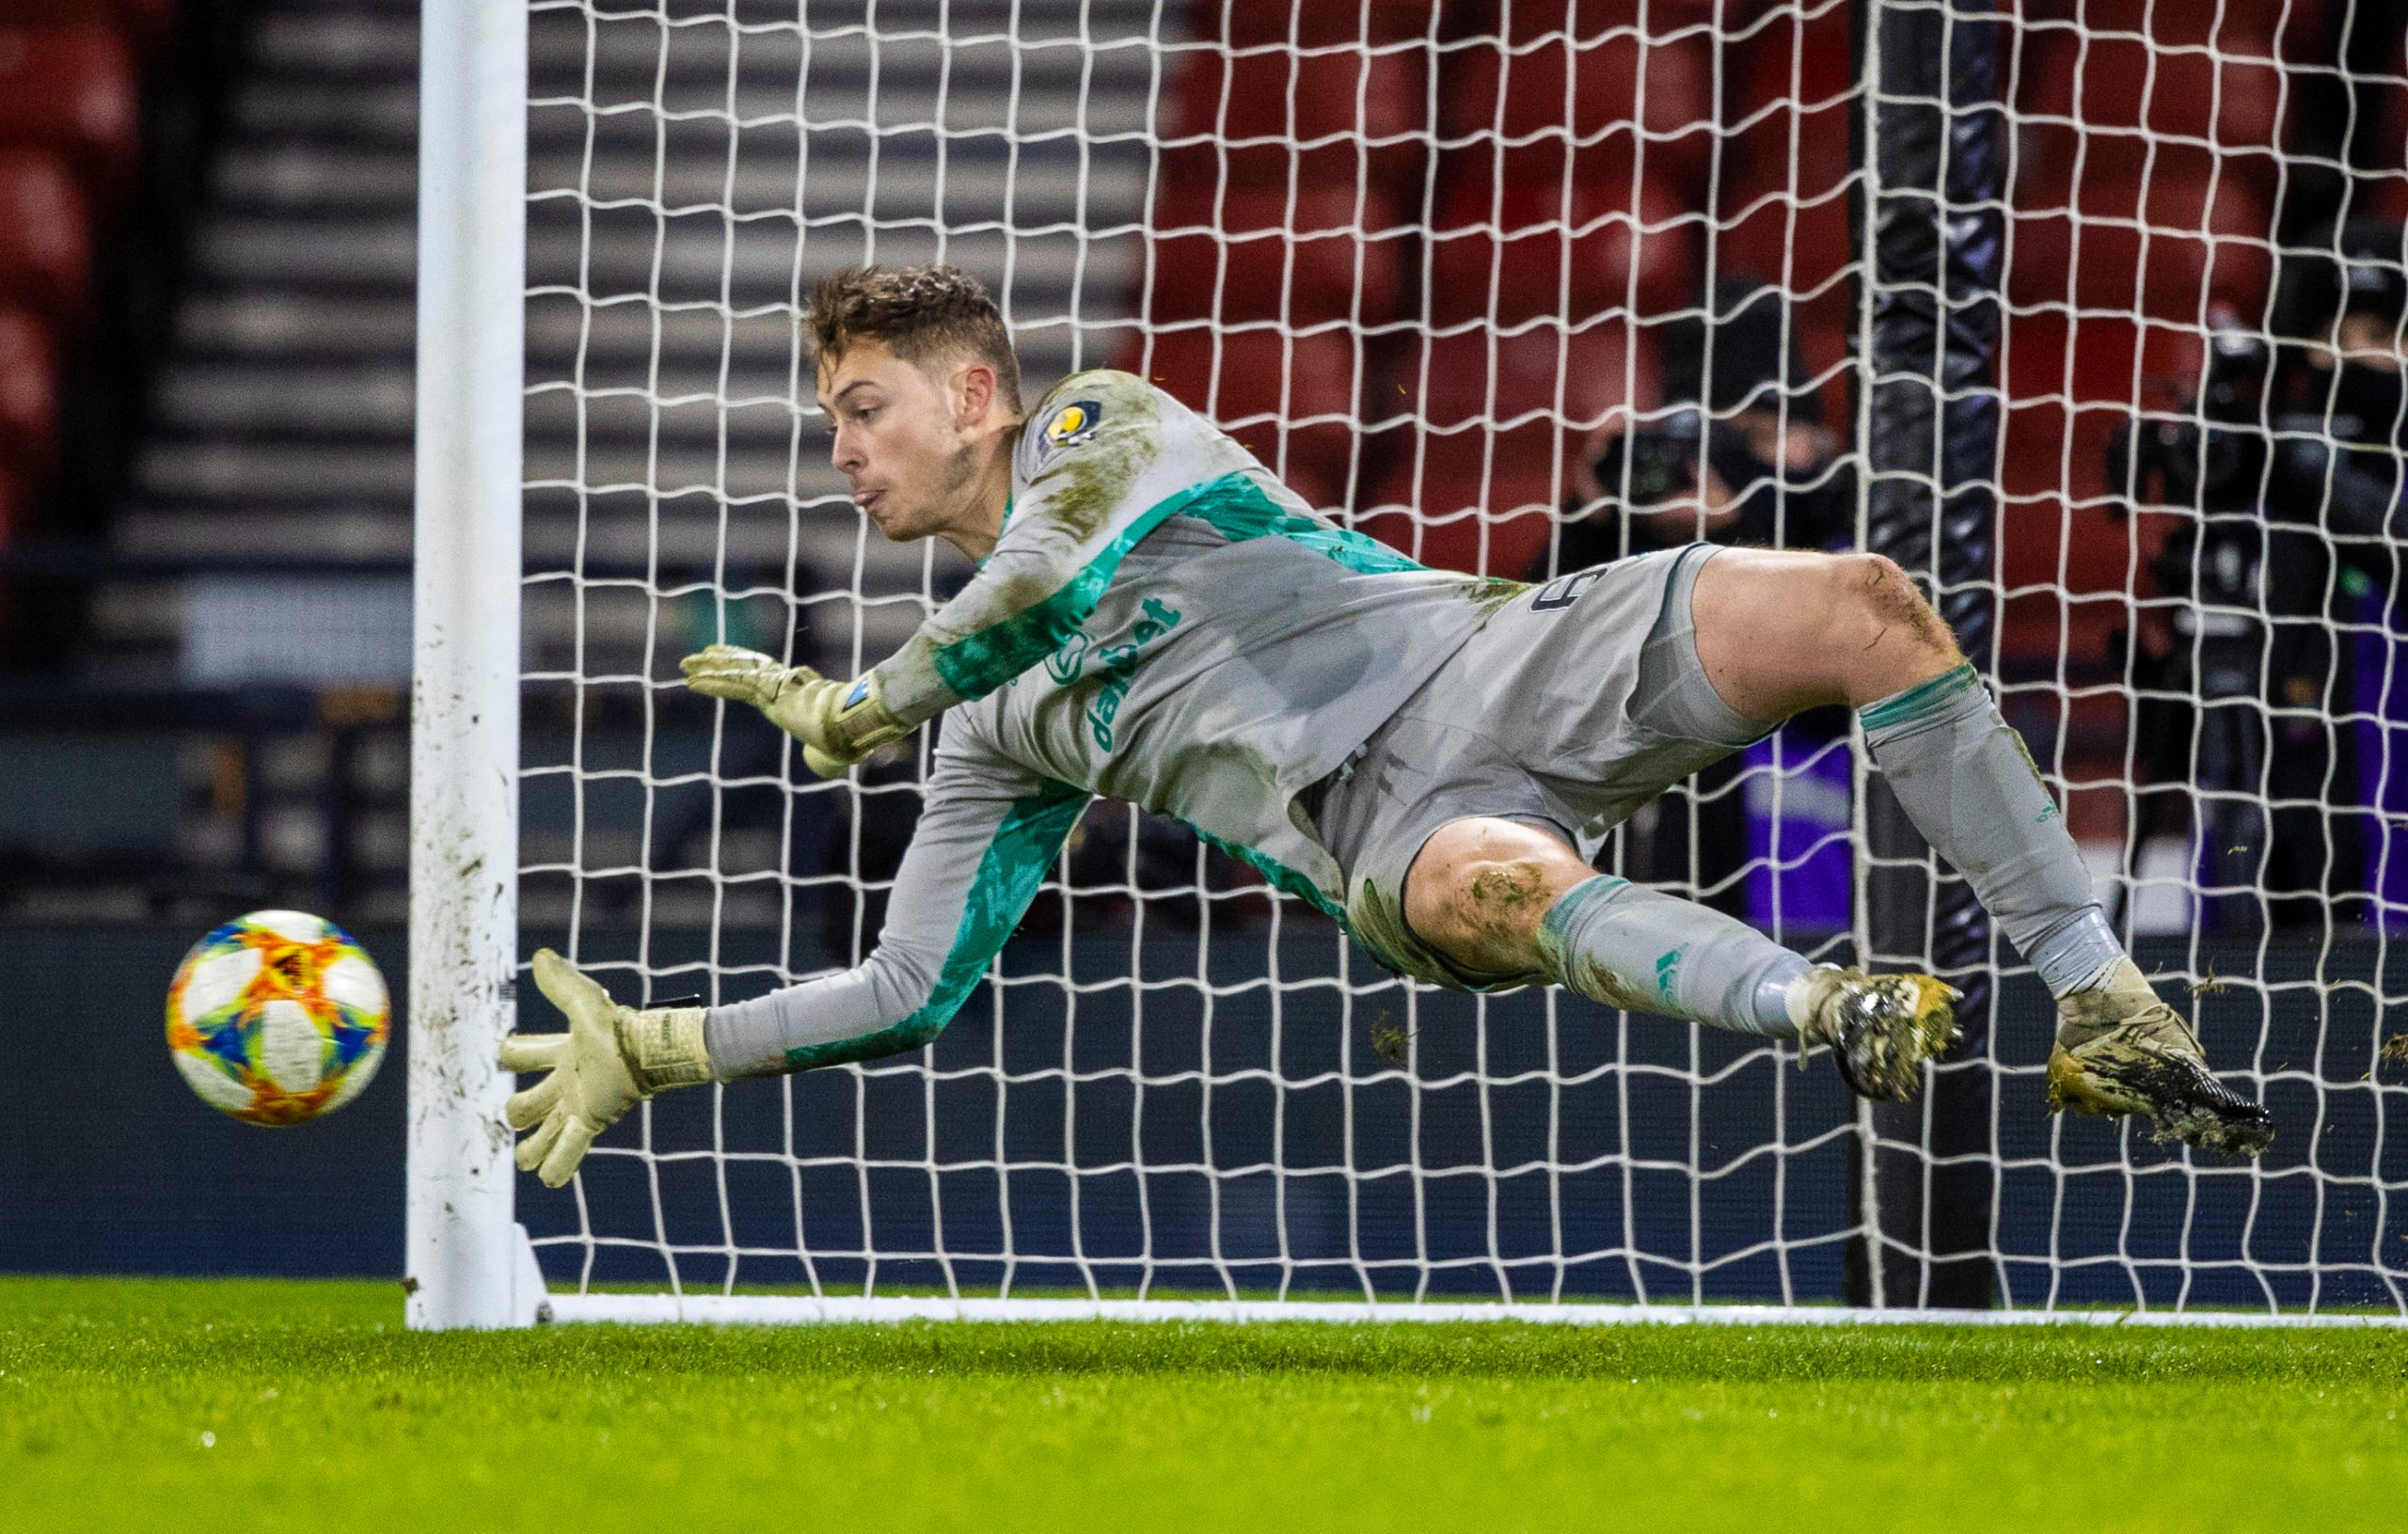 Celtic GK Conor Hazard has been written off by the media already; it will only motivate him